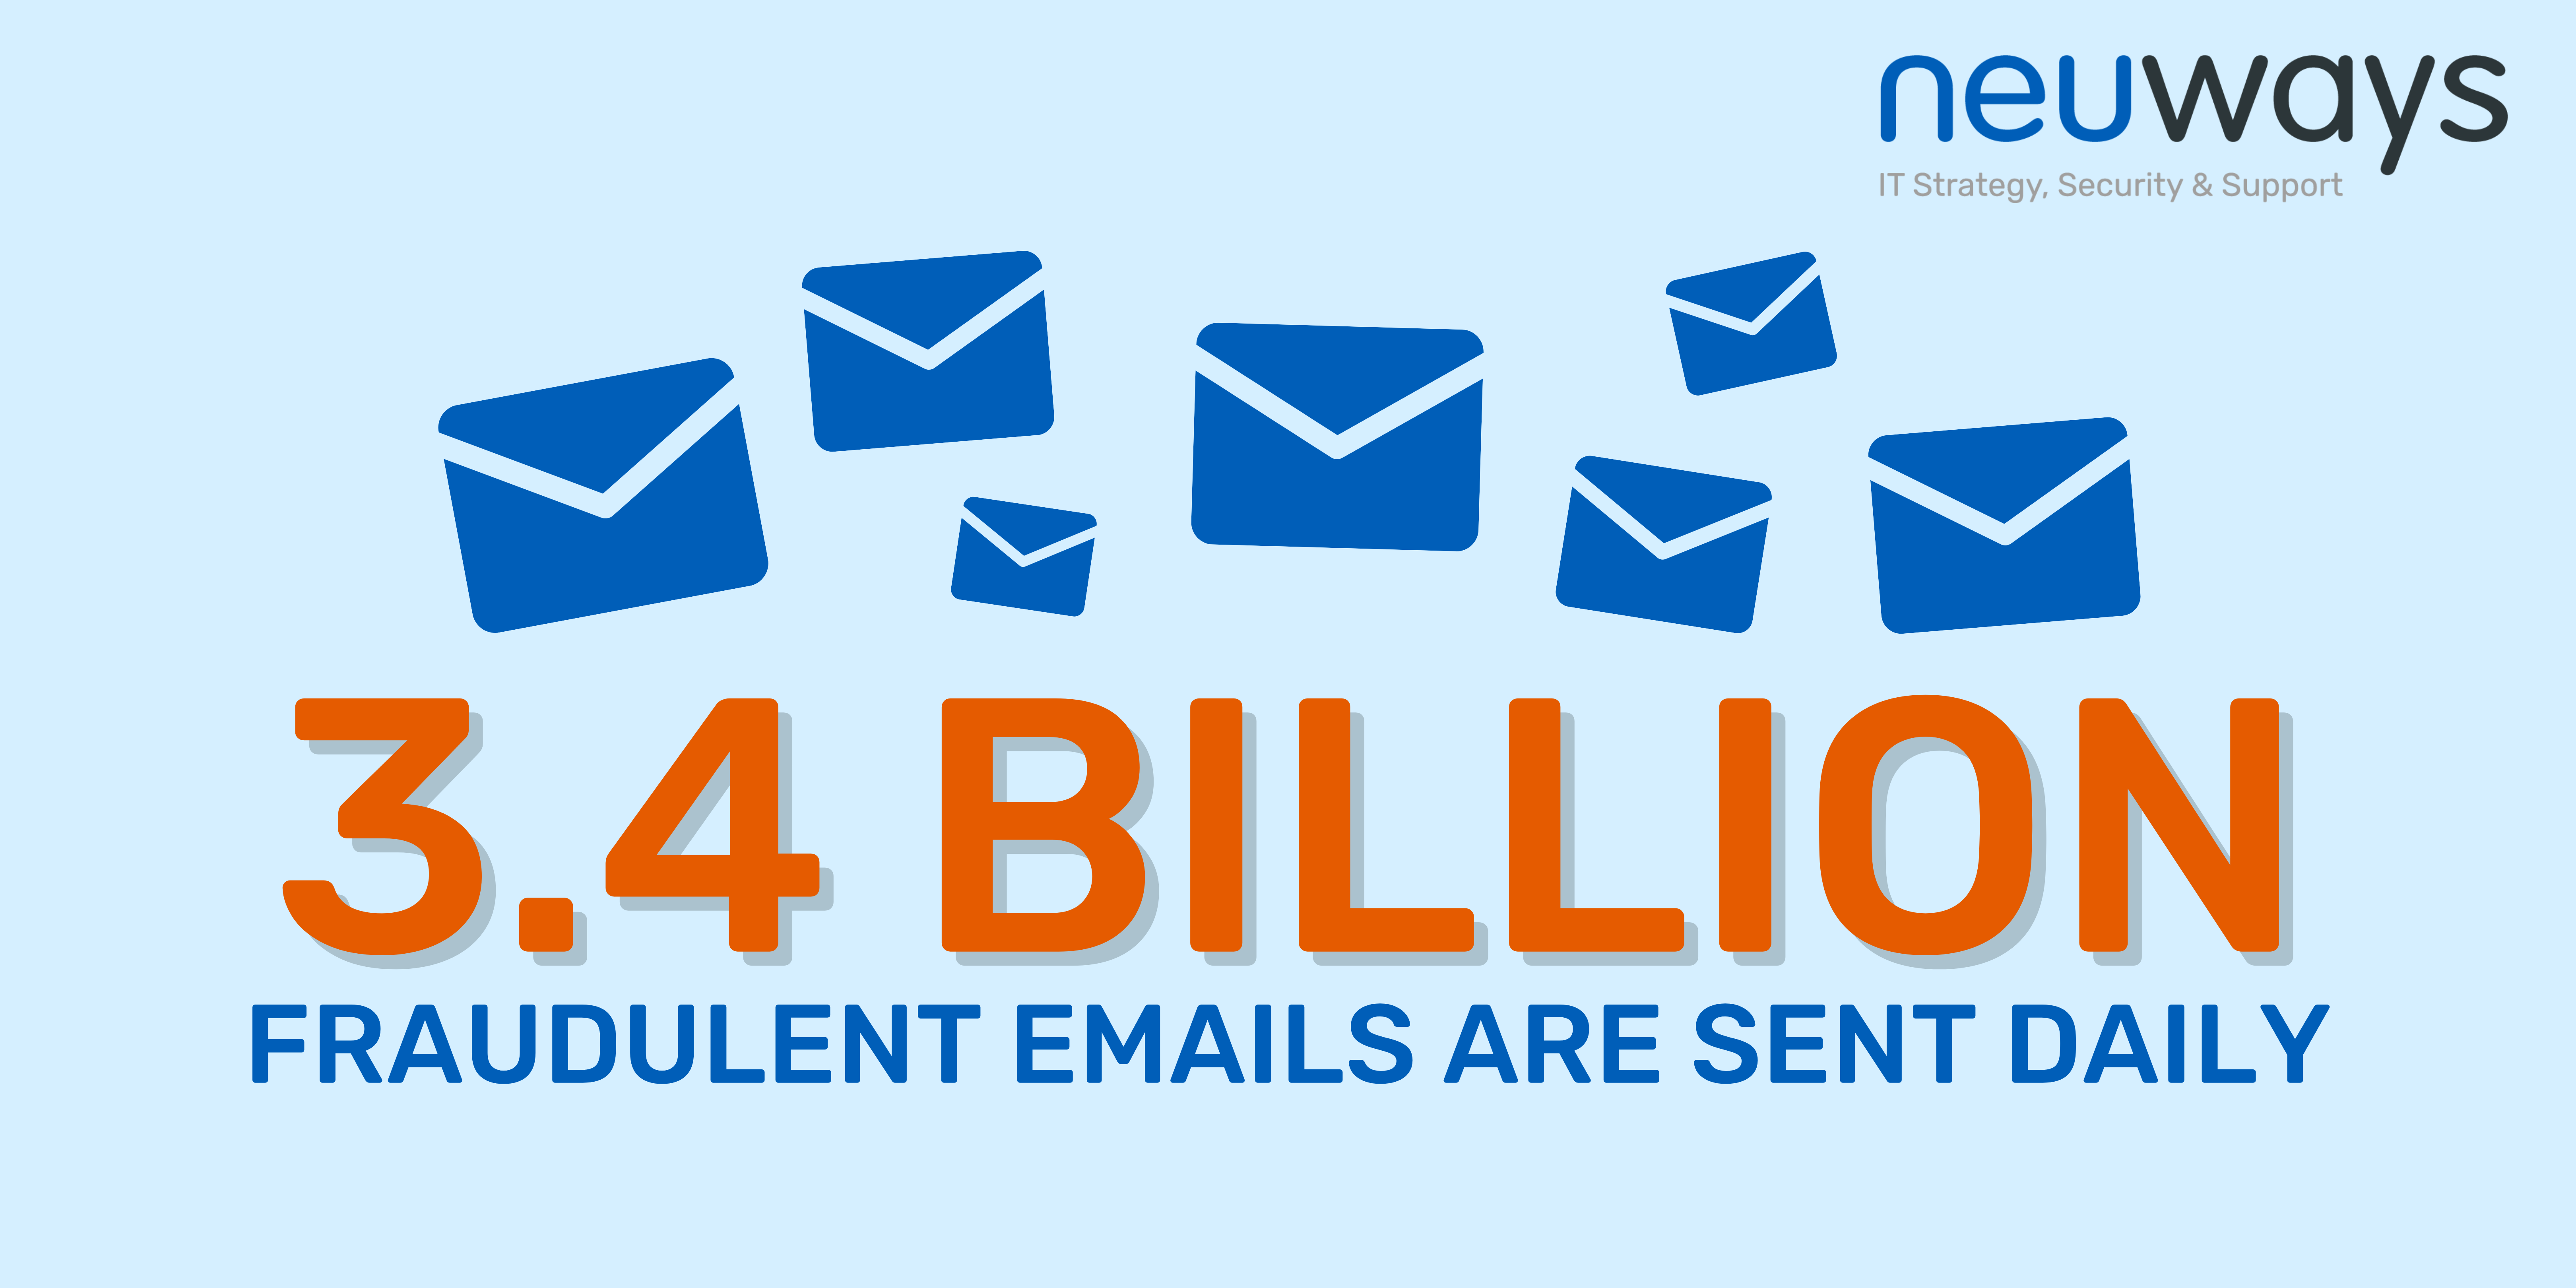 3.4 Billion Fraudulent Emails Are Sent Daily